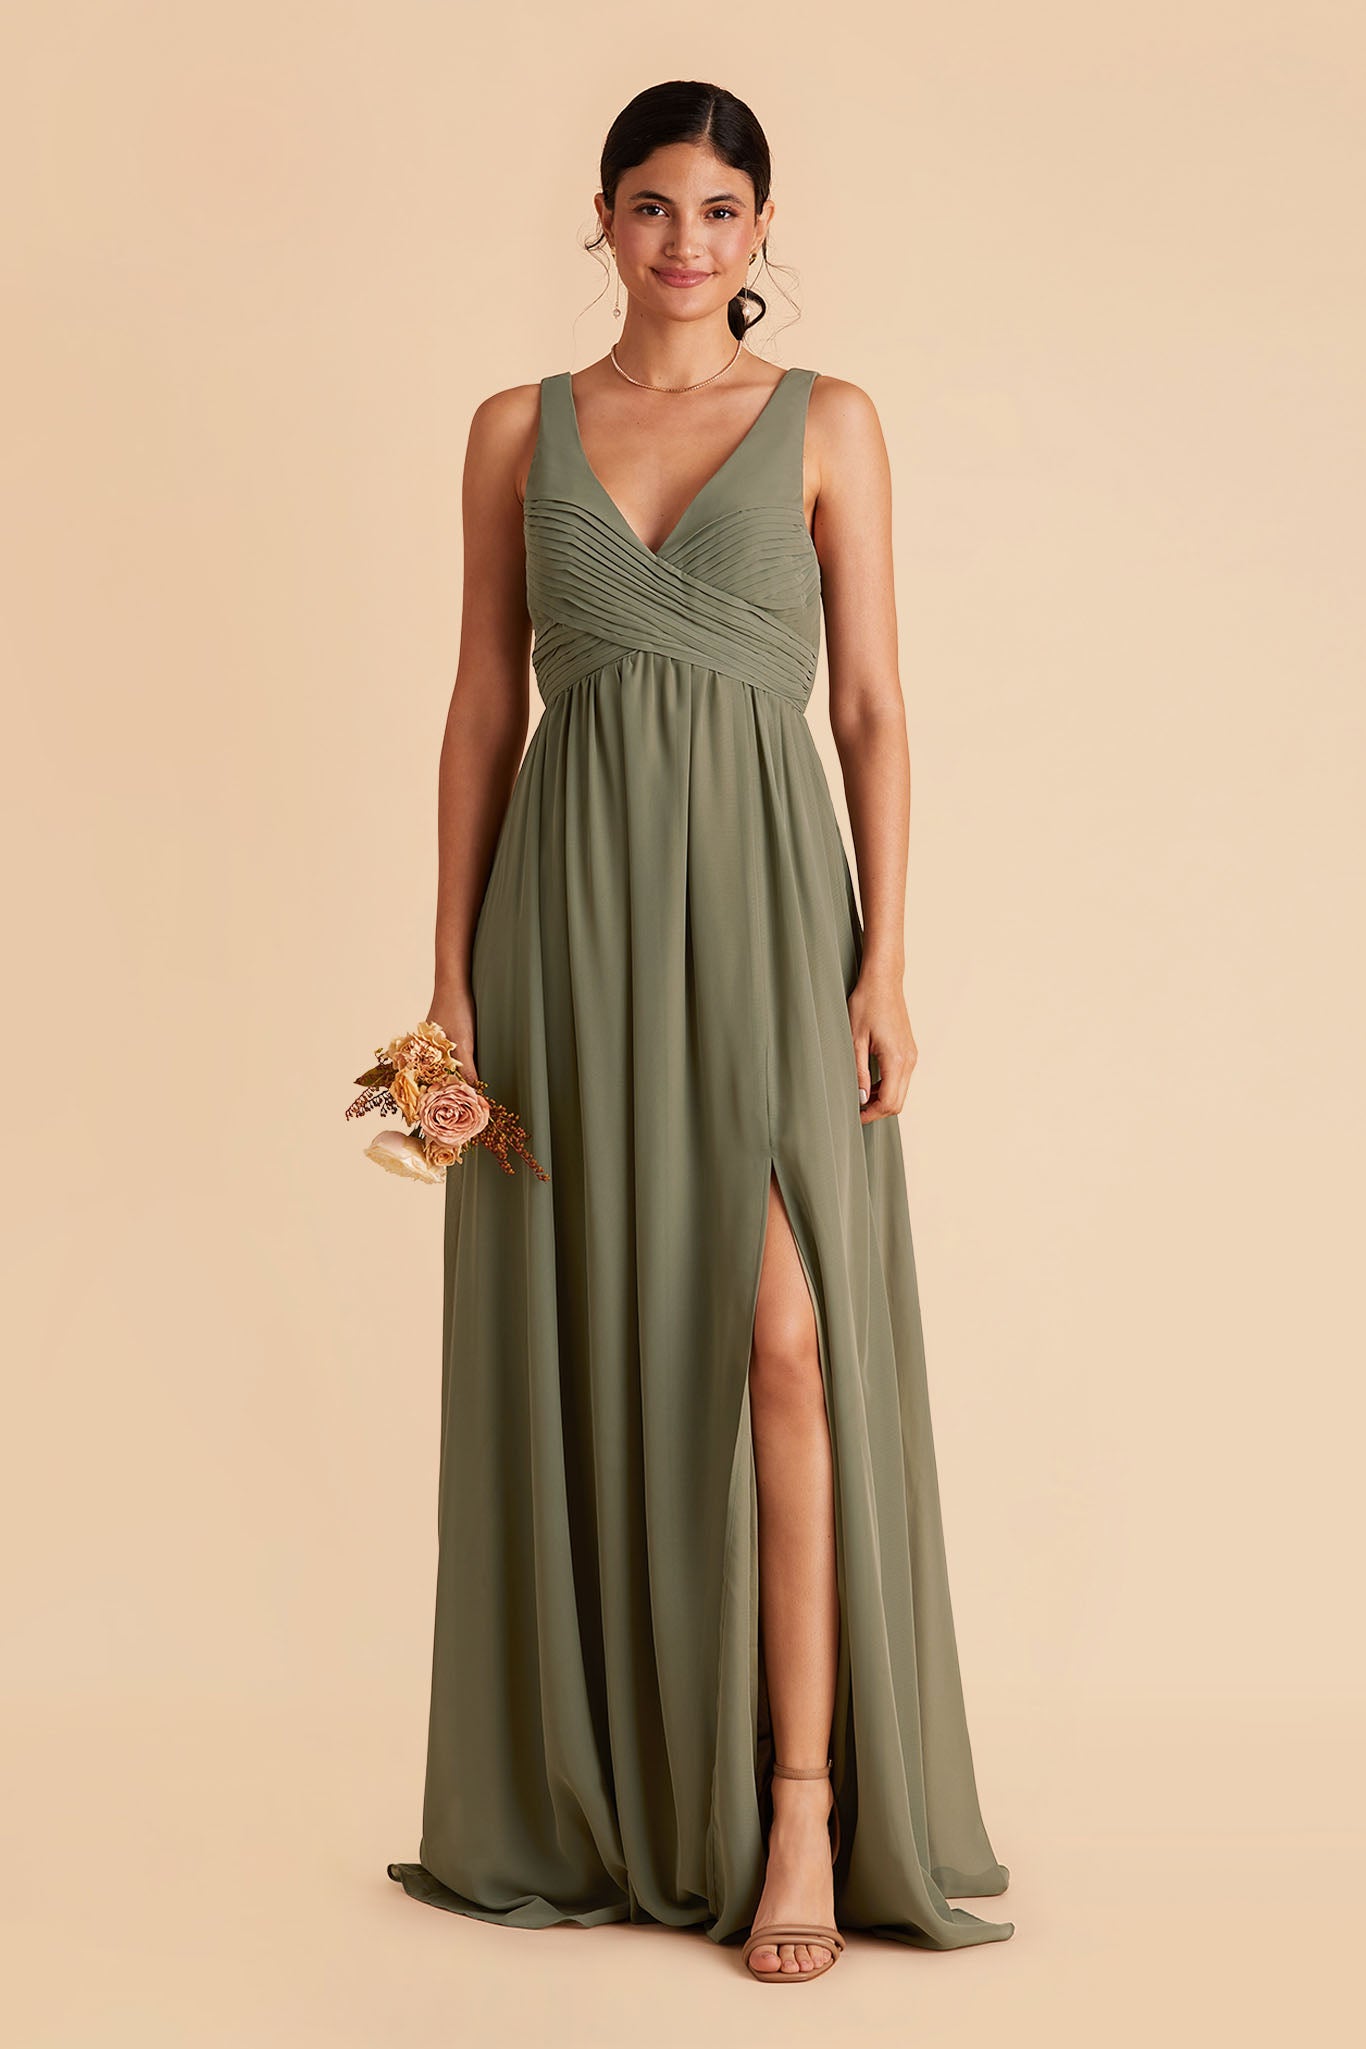 Laurie Empire maternity bridesmaid dress with slit in moss green by Birdy Grey, front view